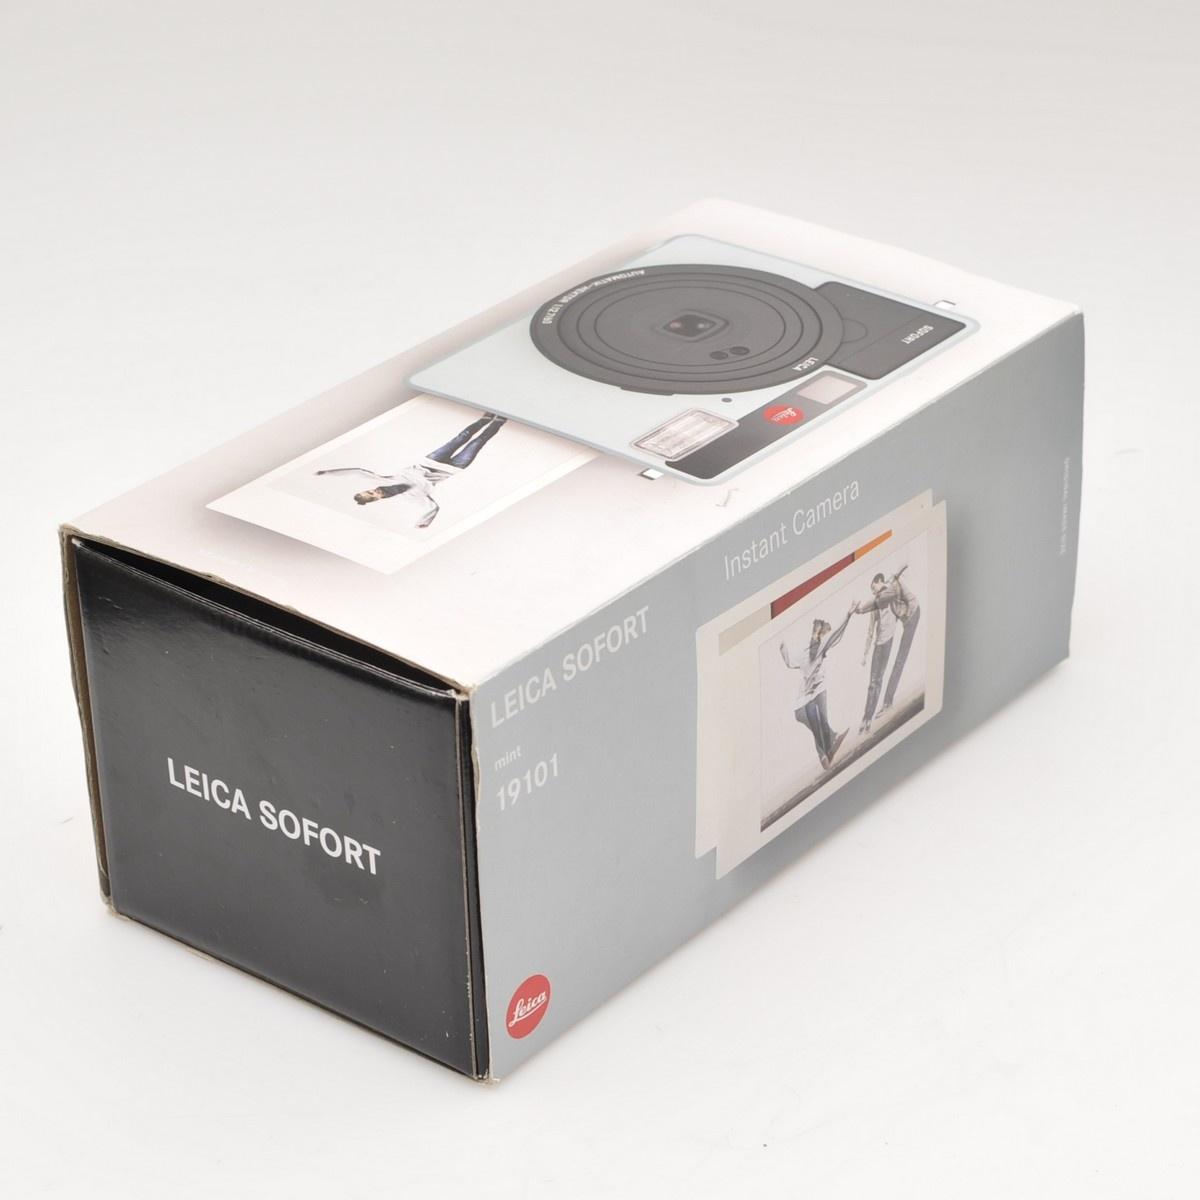 Leica Sofort instant camera in mint colour new in the box